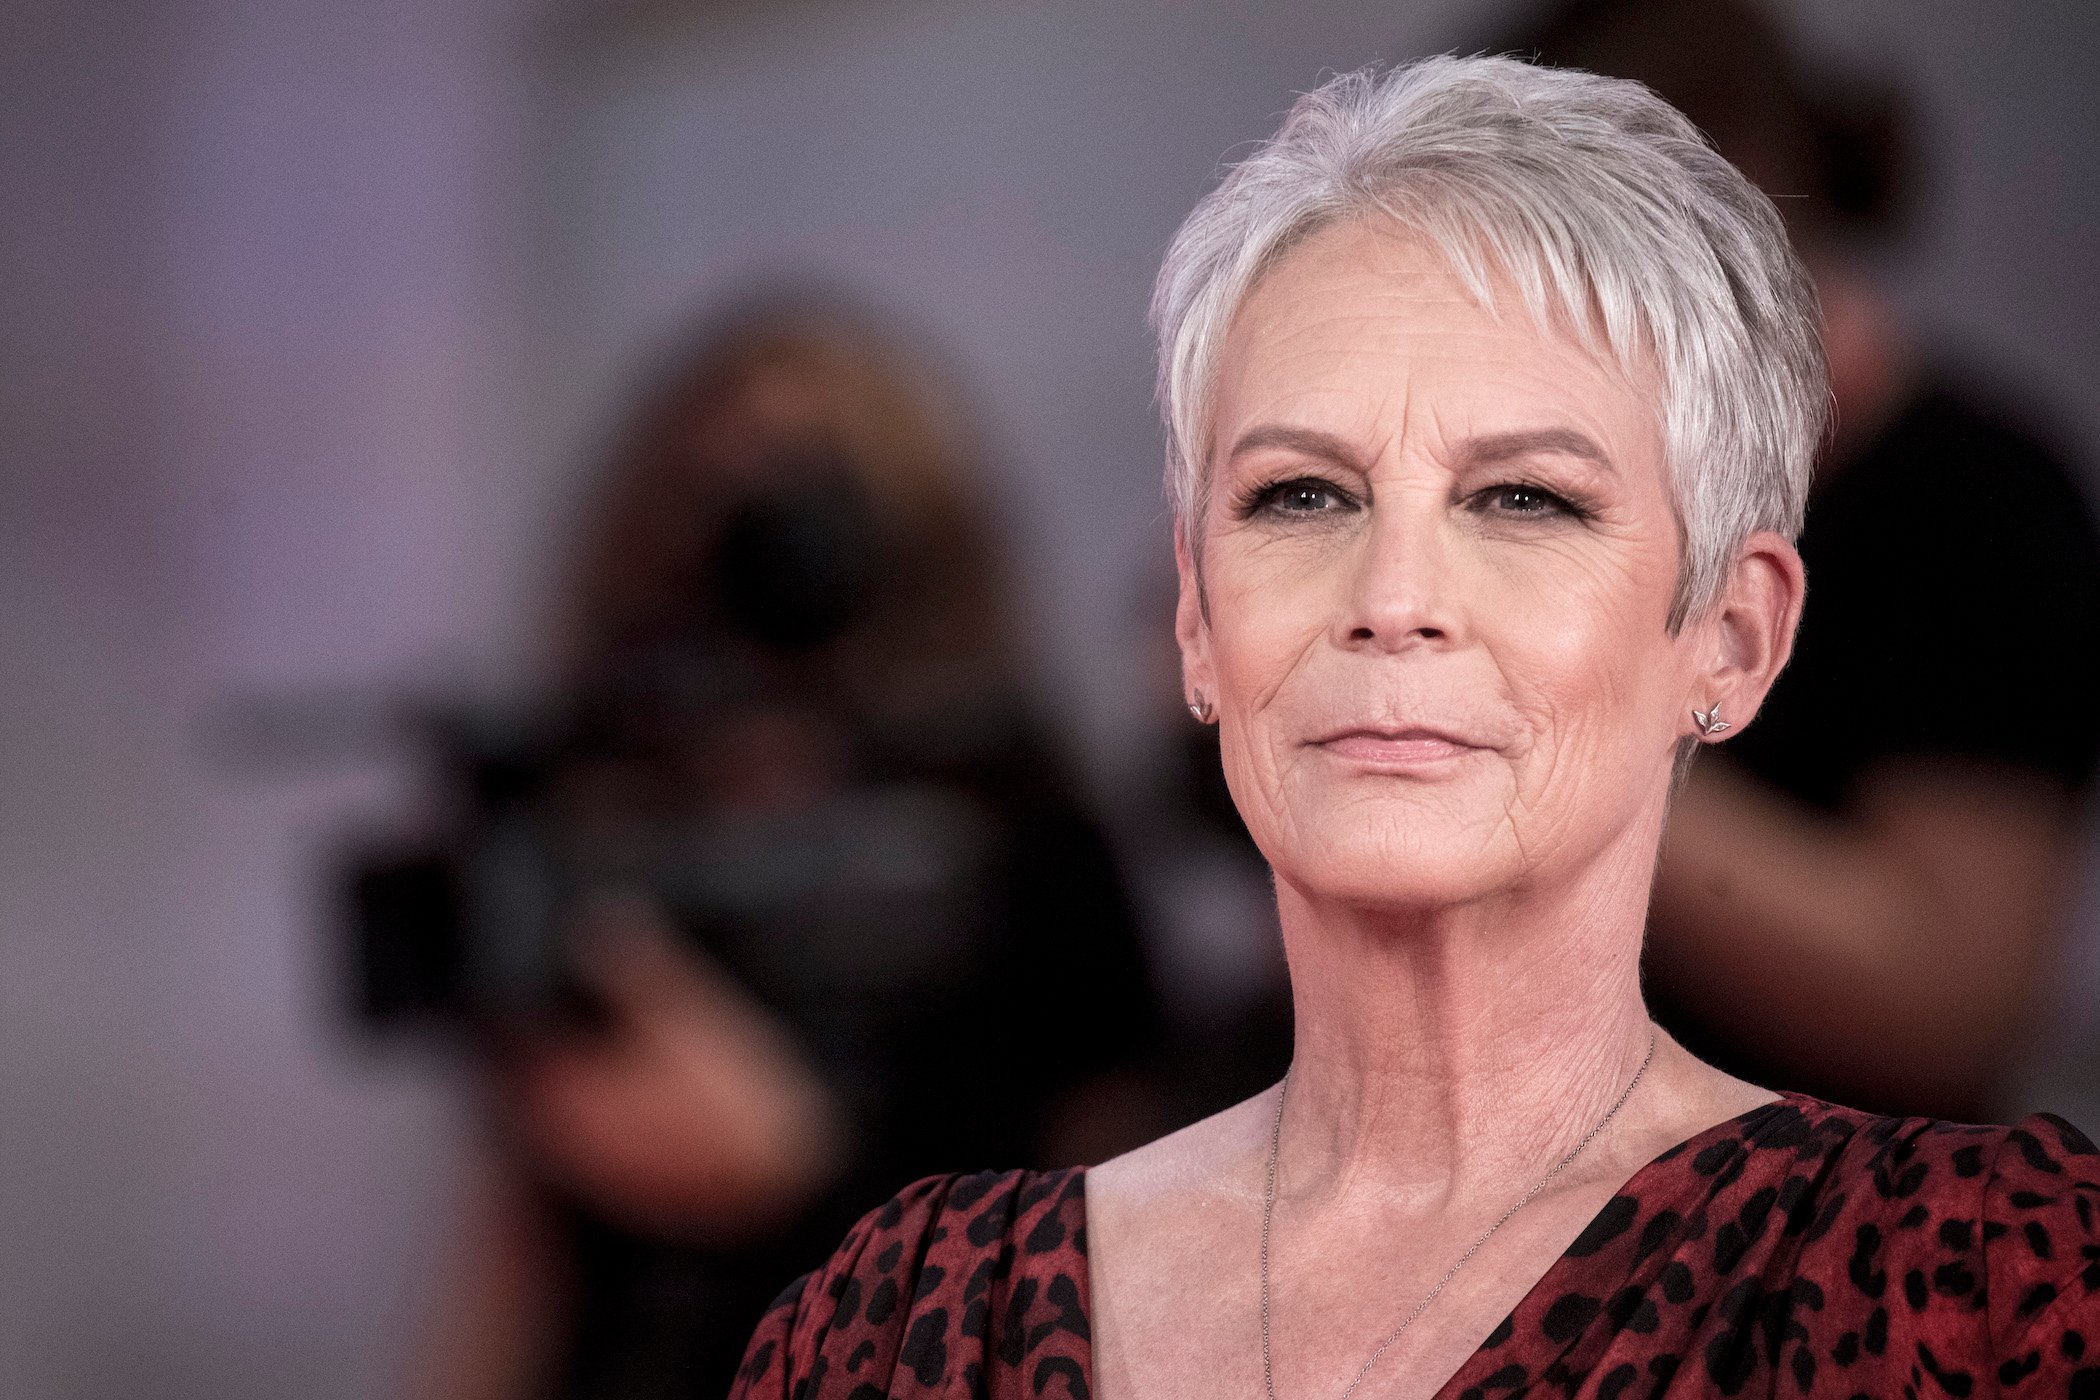 Jamie Lee Curtis smiling for the cameras at the Venice Film Festival to promote her Halloween Kills movie